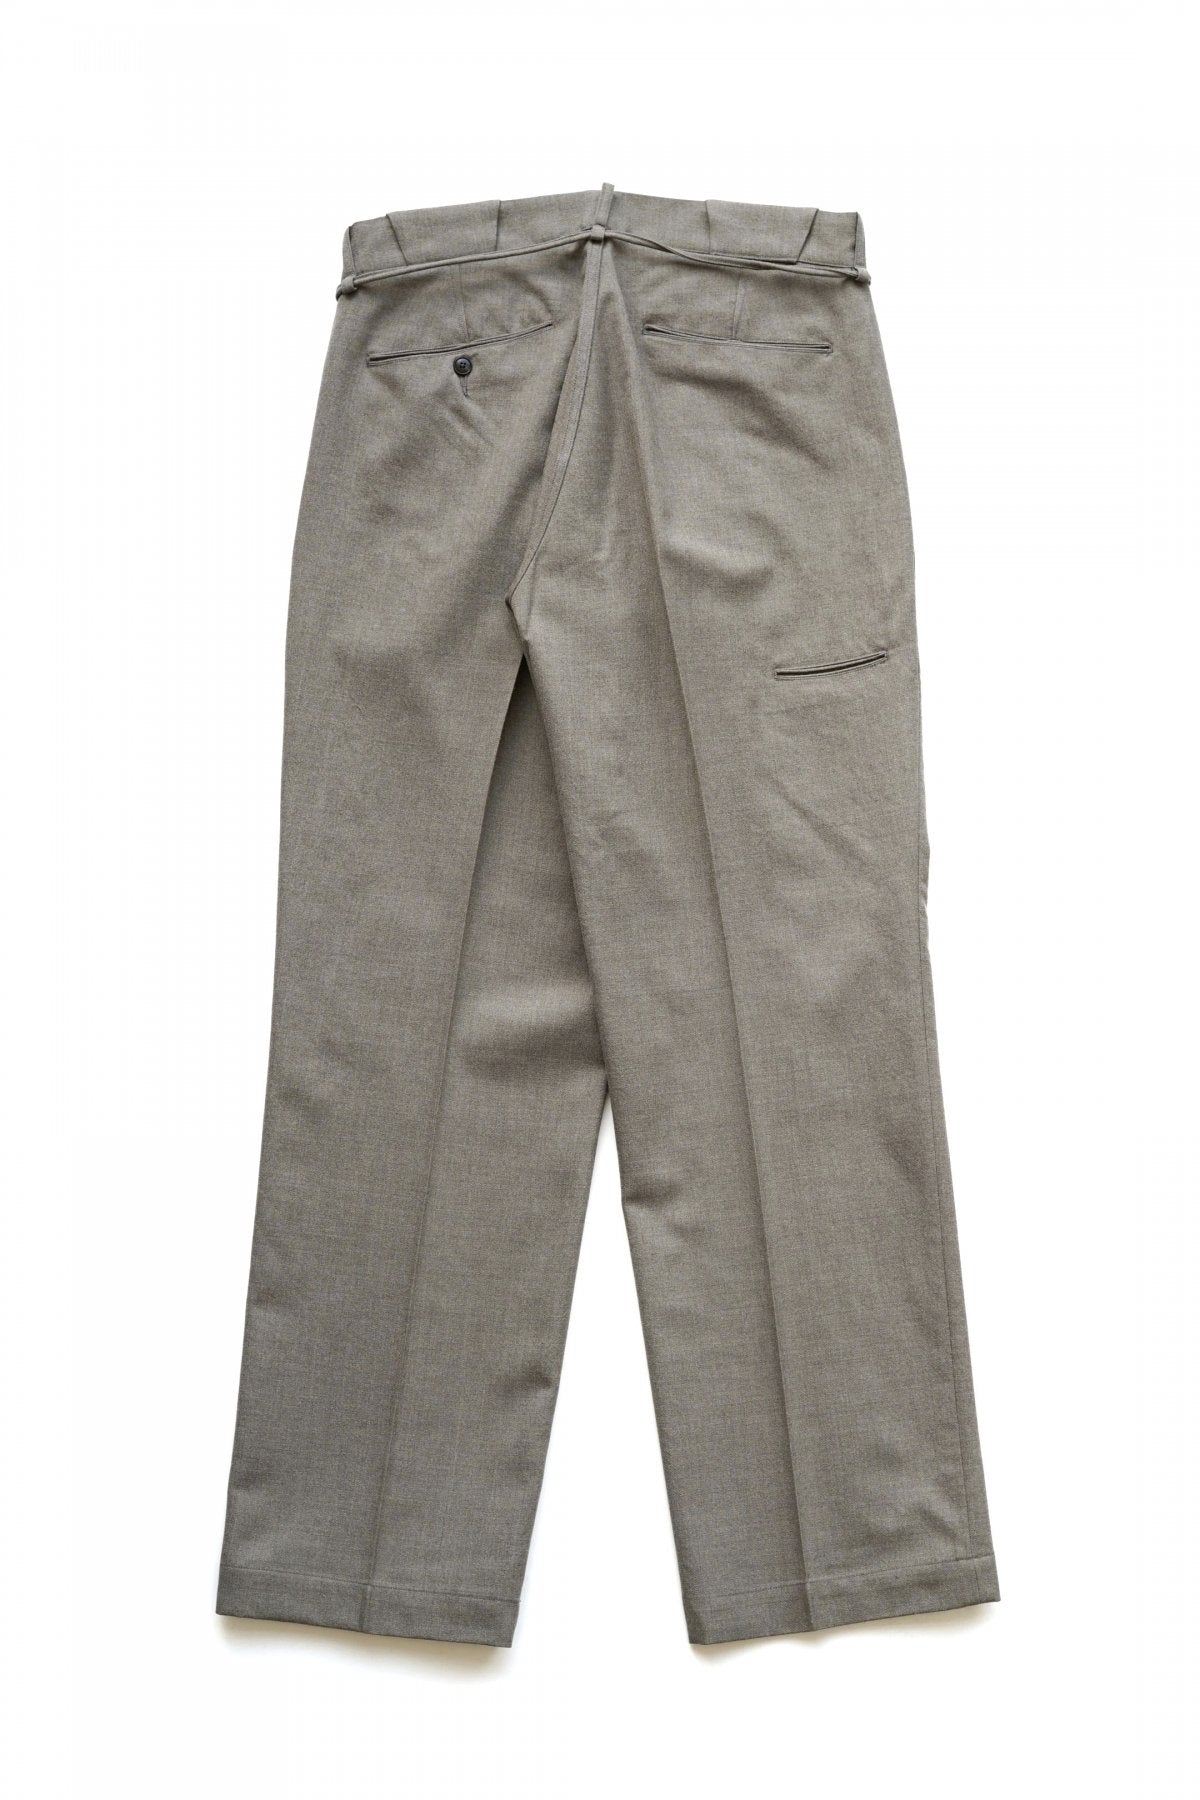 OLD JOE & CO. STRING WAIST WORK TROUSER – unexpected store